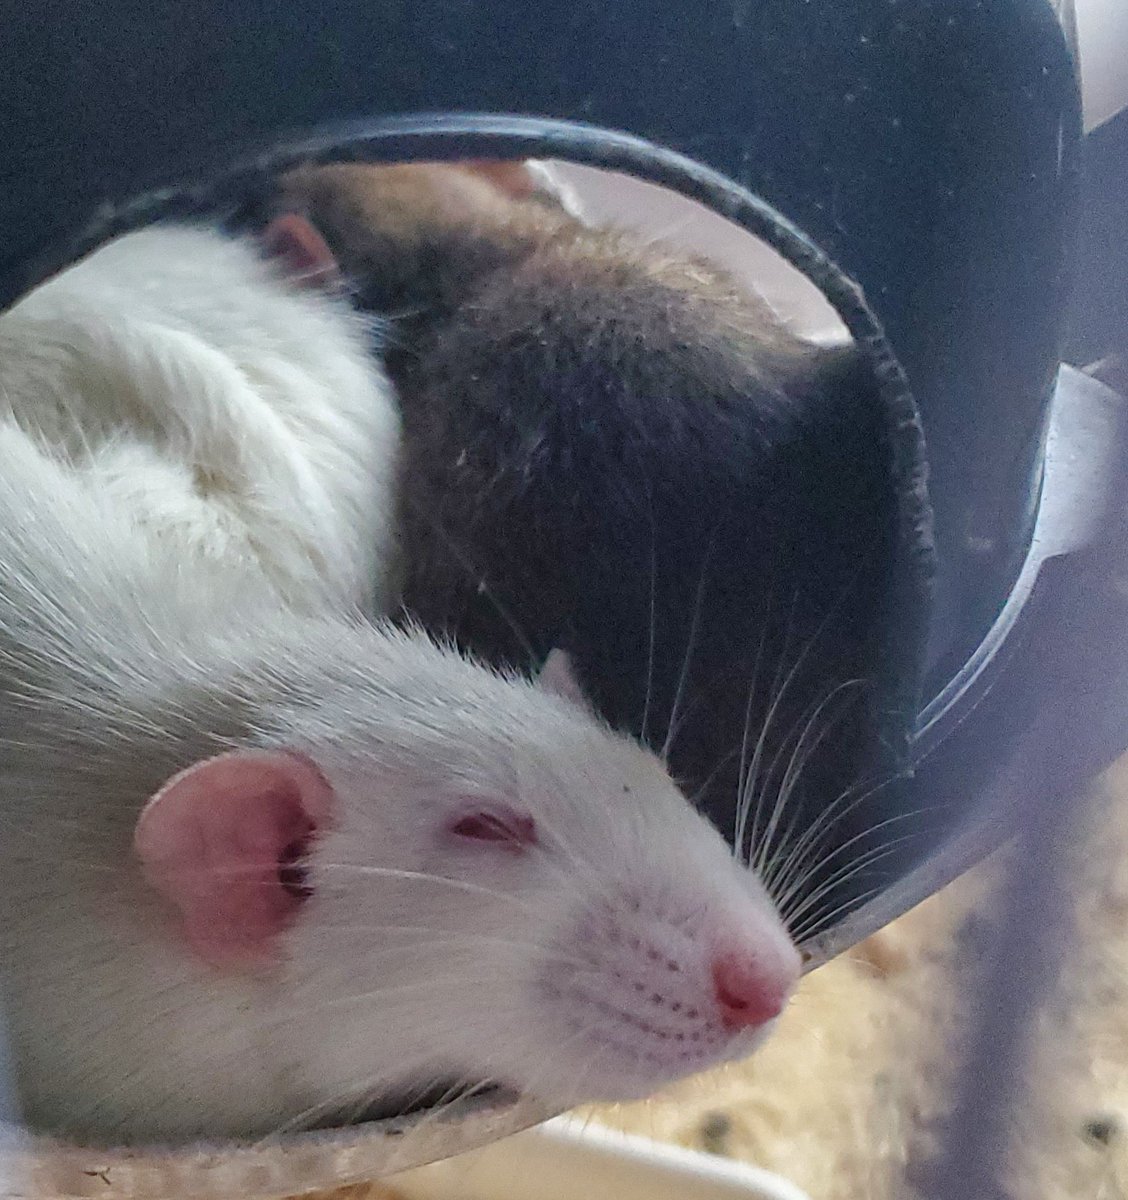 I too am bipolar, and what I leave here are my beloved rats and my lovely days. I like to discuss and chat, so feel free to DM me. I've only had my rats for two months. I'd like to make many friends through rats things.